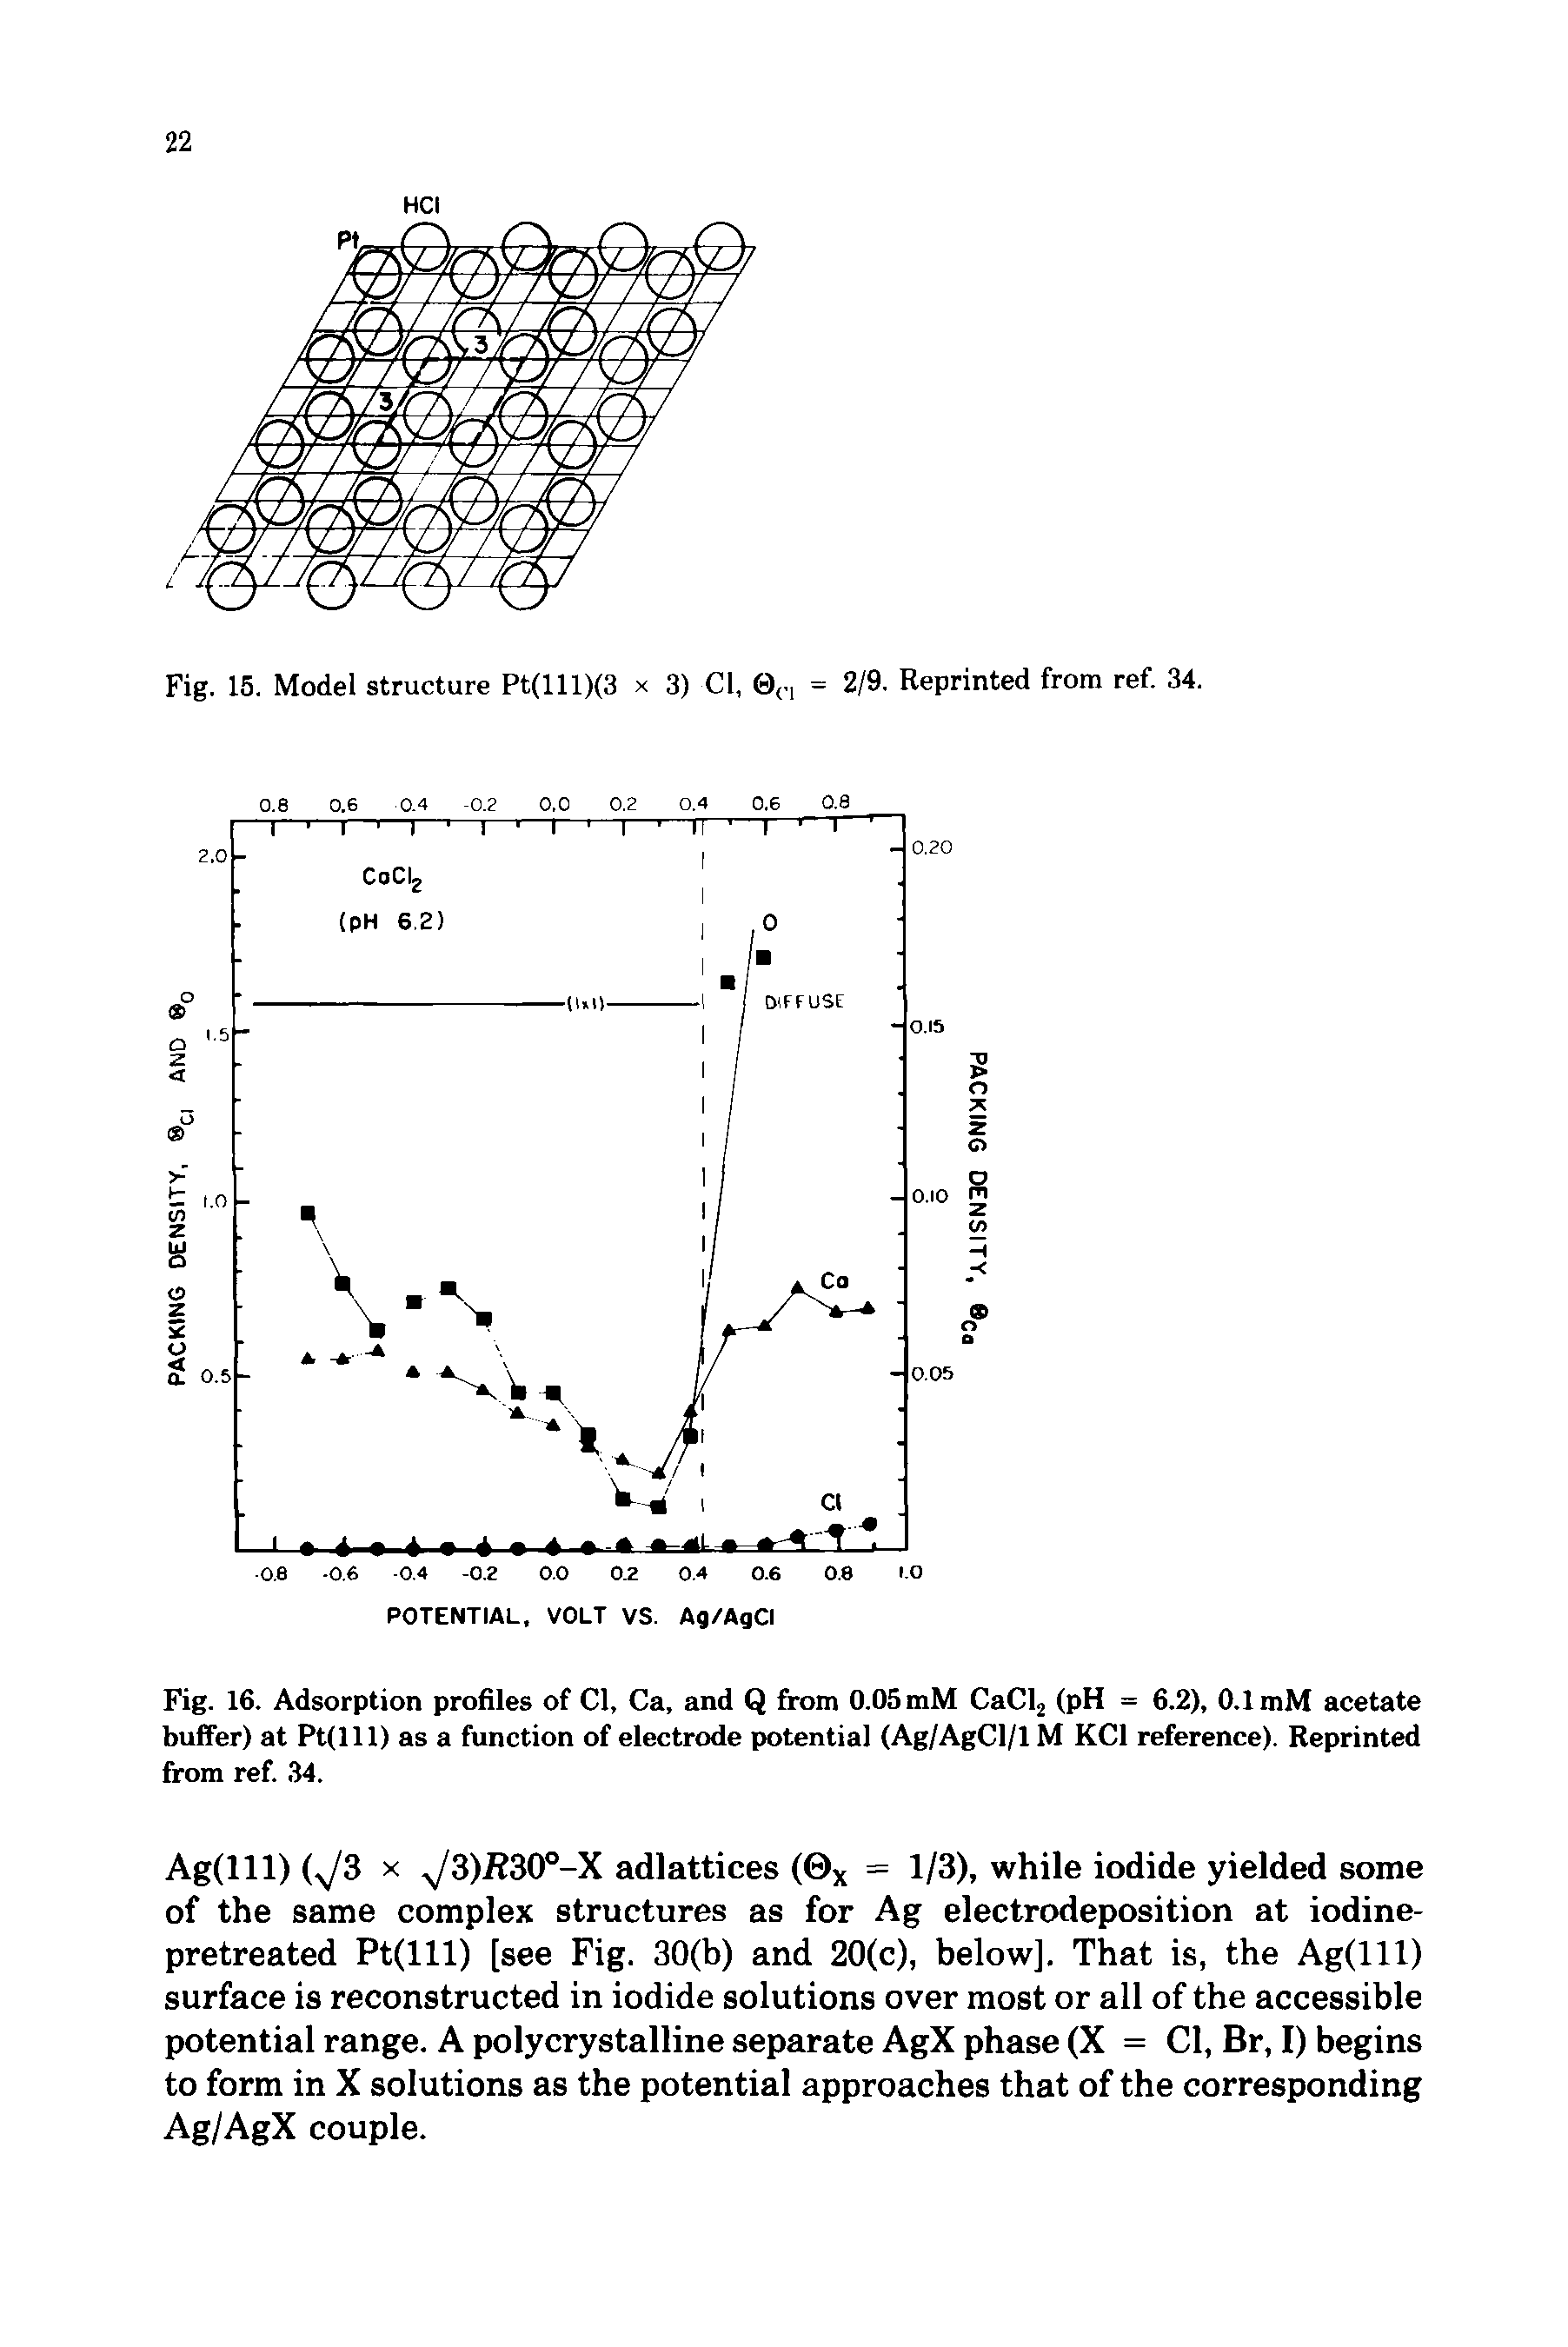 Fig. 16. Adsorption profiles of Cl, Ca, and Q from 0.05 mM CaCl2 (pH = 6.2), 0.1 mM acetate buffer) at Pt(lll) as a function of electrode potential (Ag/AgCl/1 M KC1 reference). Reprinted from ref. 34.